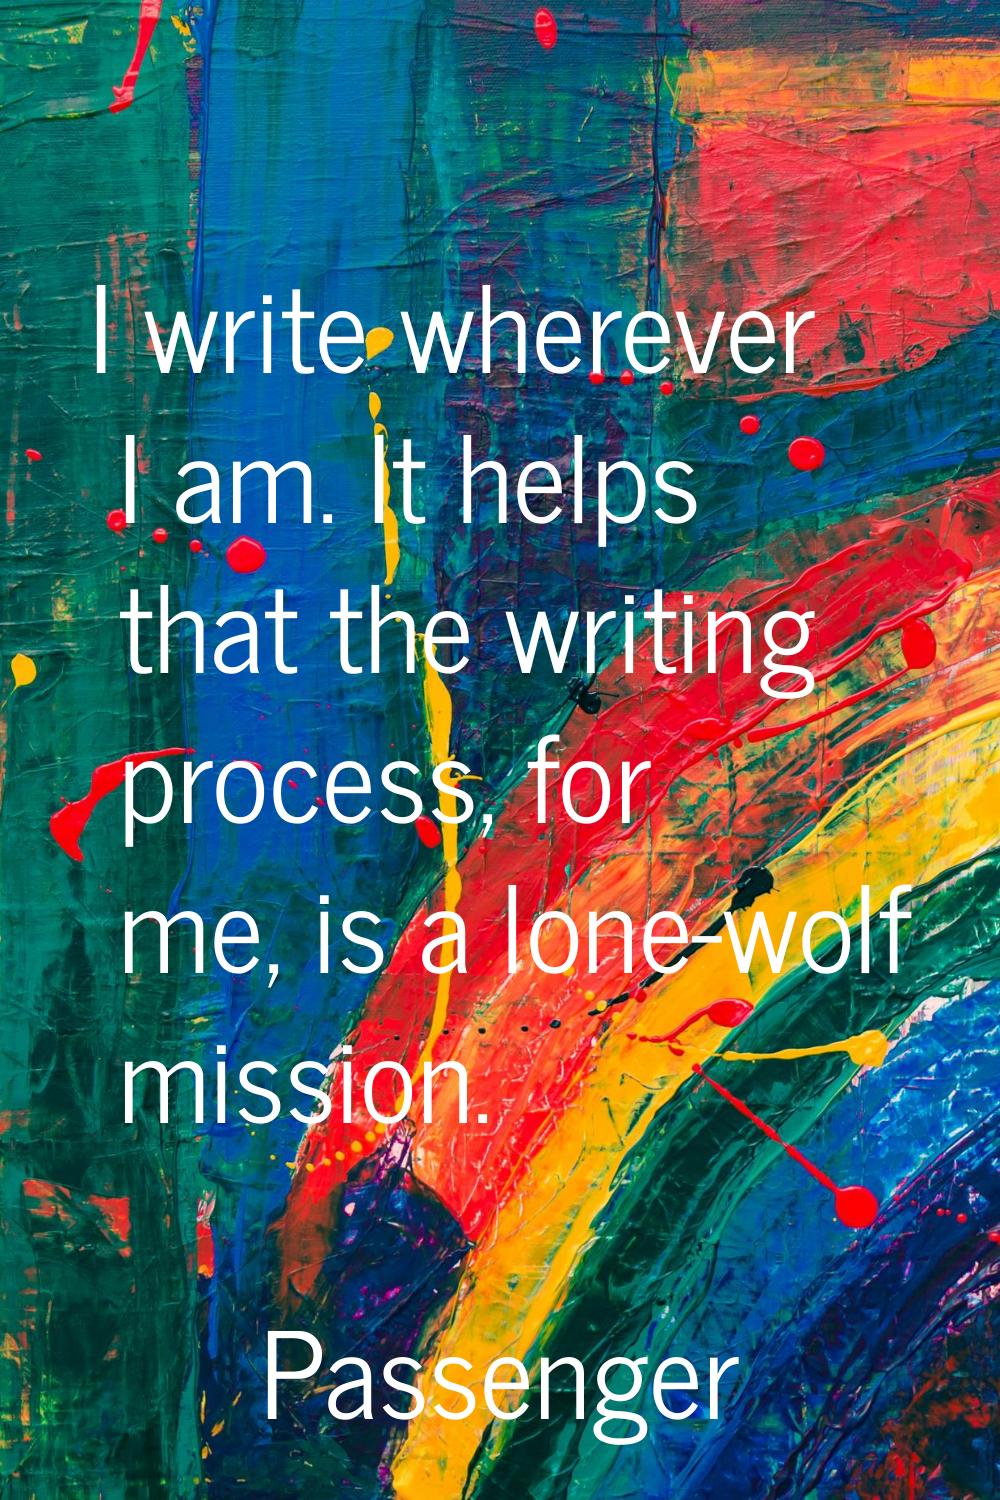 I write wherever I am. It helps that the writing process, for me, is a lone-wolf mission.